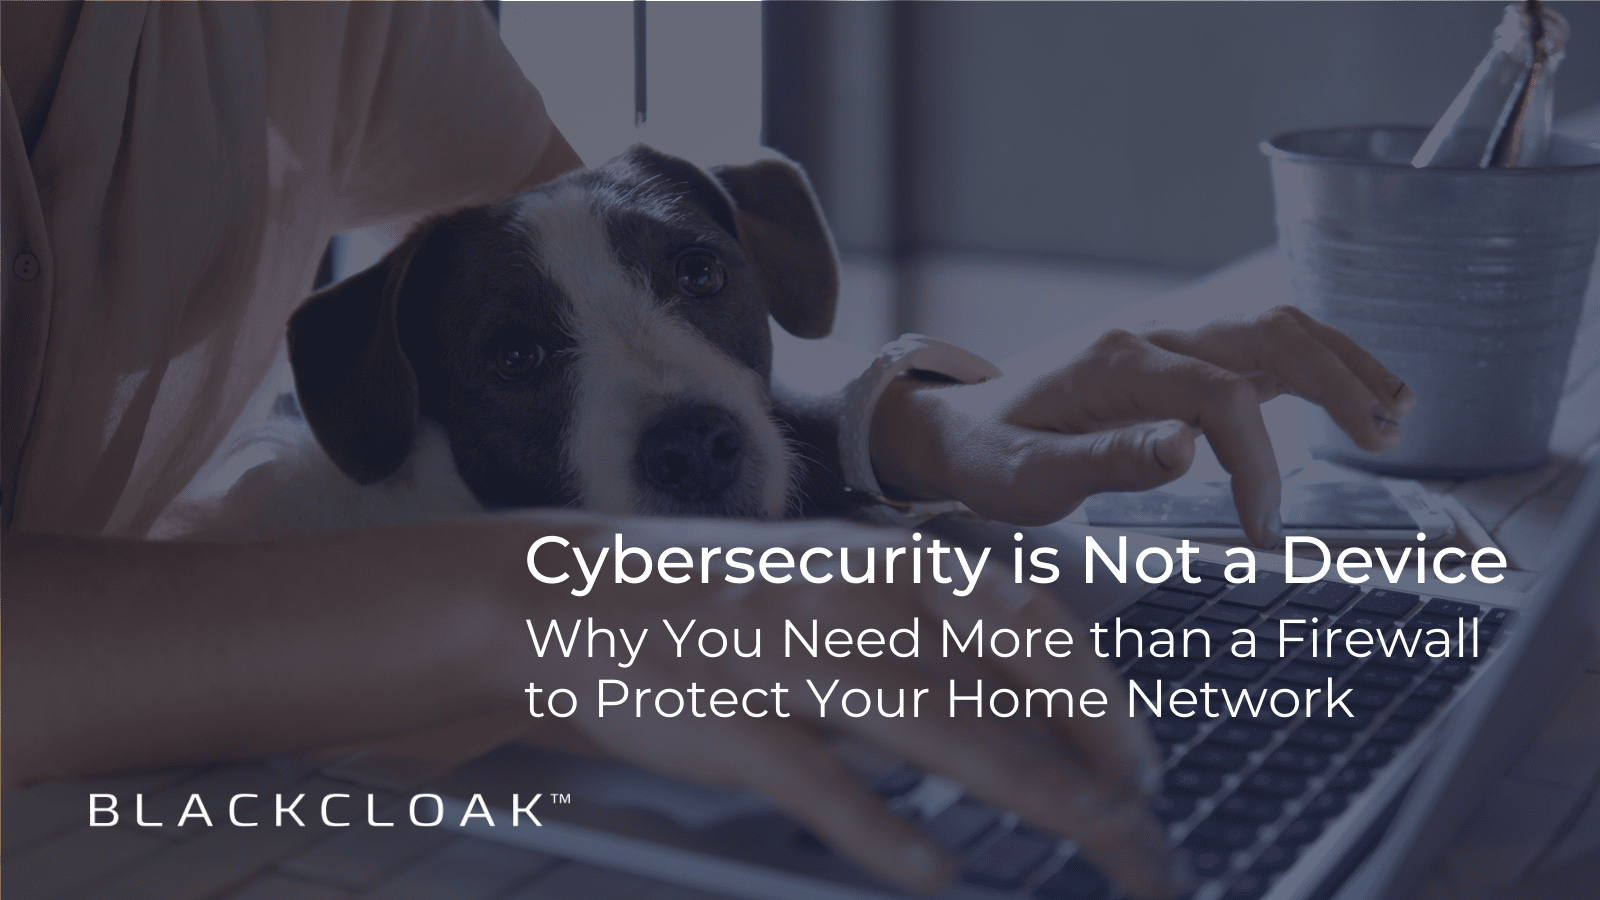 Cybersecurity is not a device: Why you need more than a firewall to protect your home network